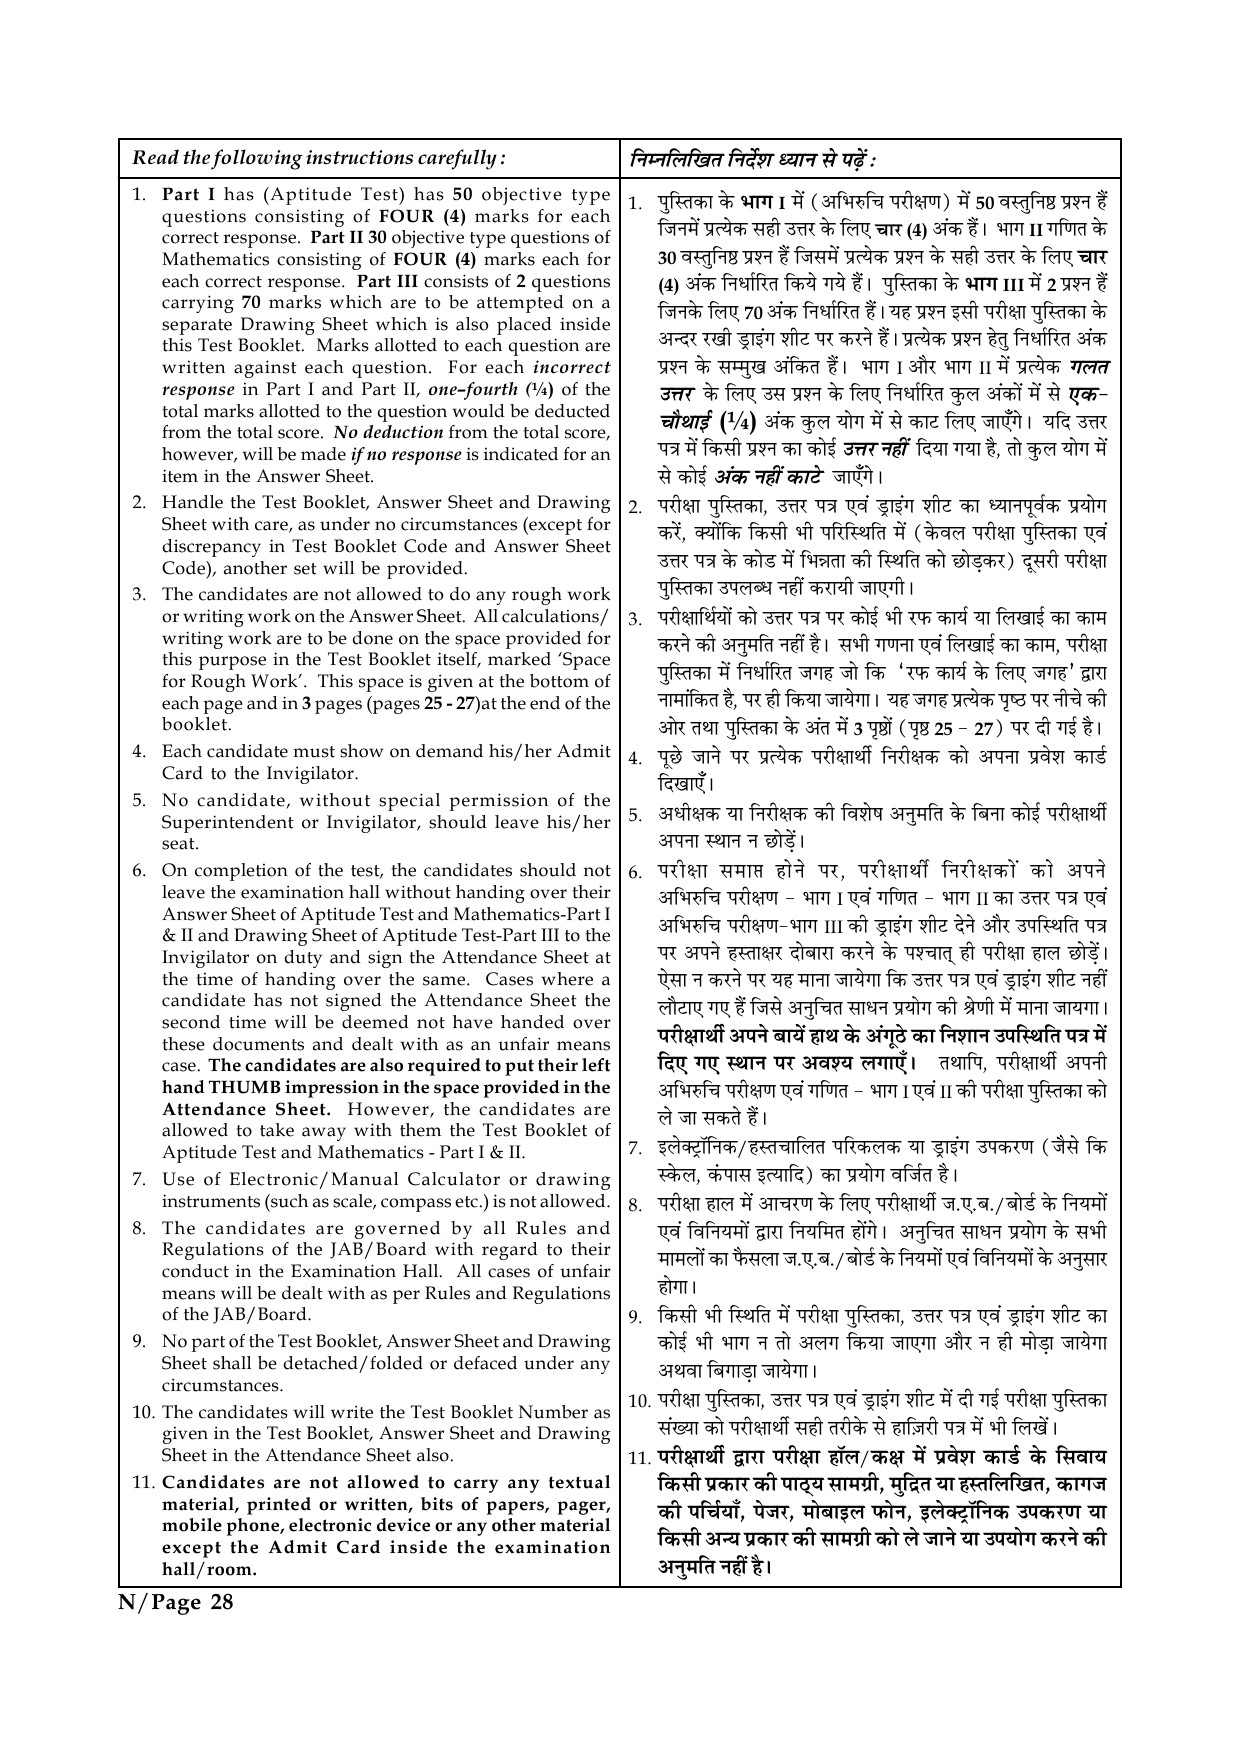 JEE Main Exam Question Paper 2015 Booklet N 25